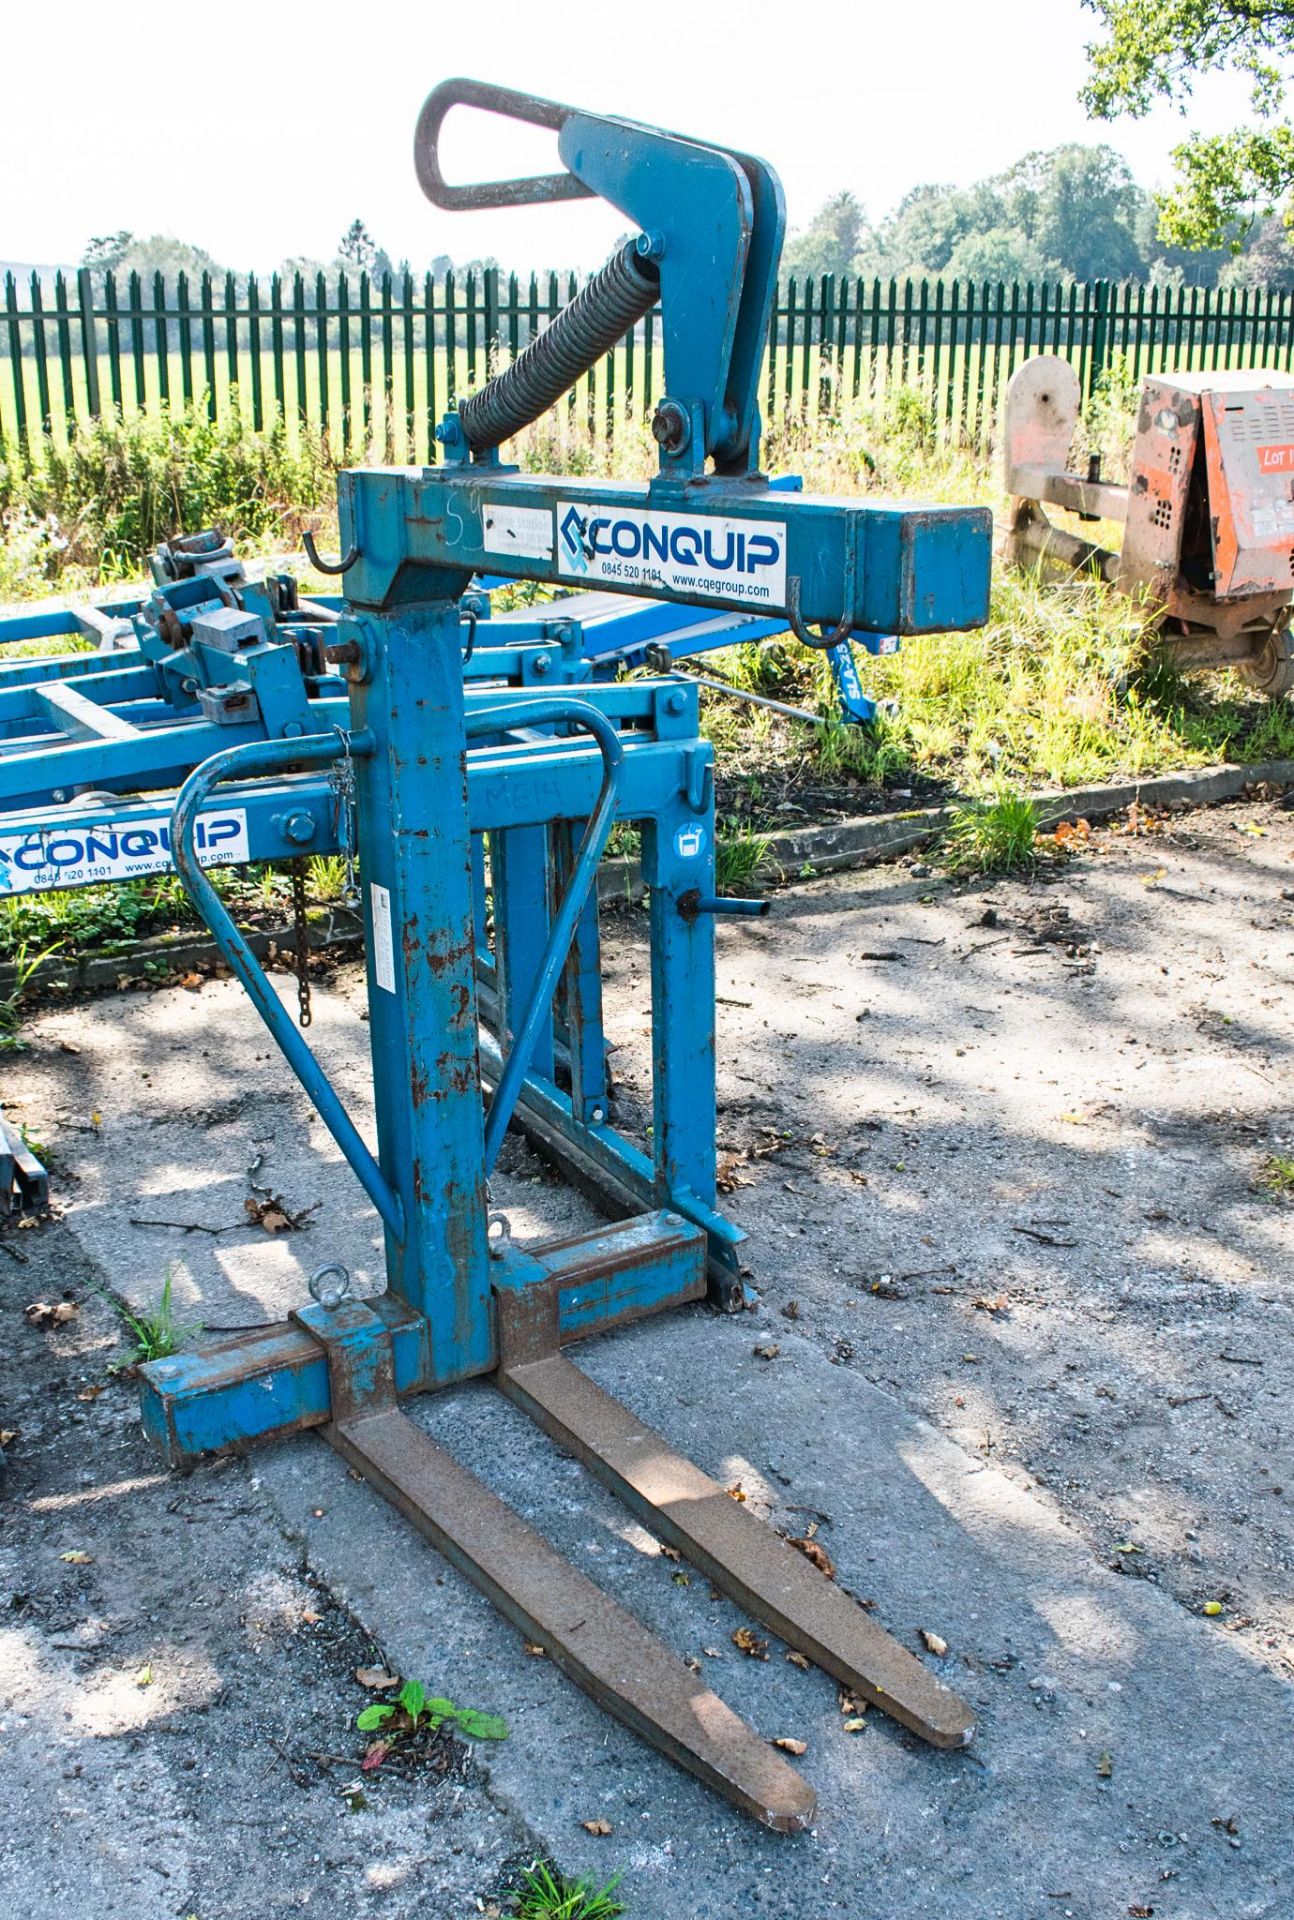 Conquip fork lifting attachment